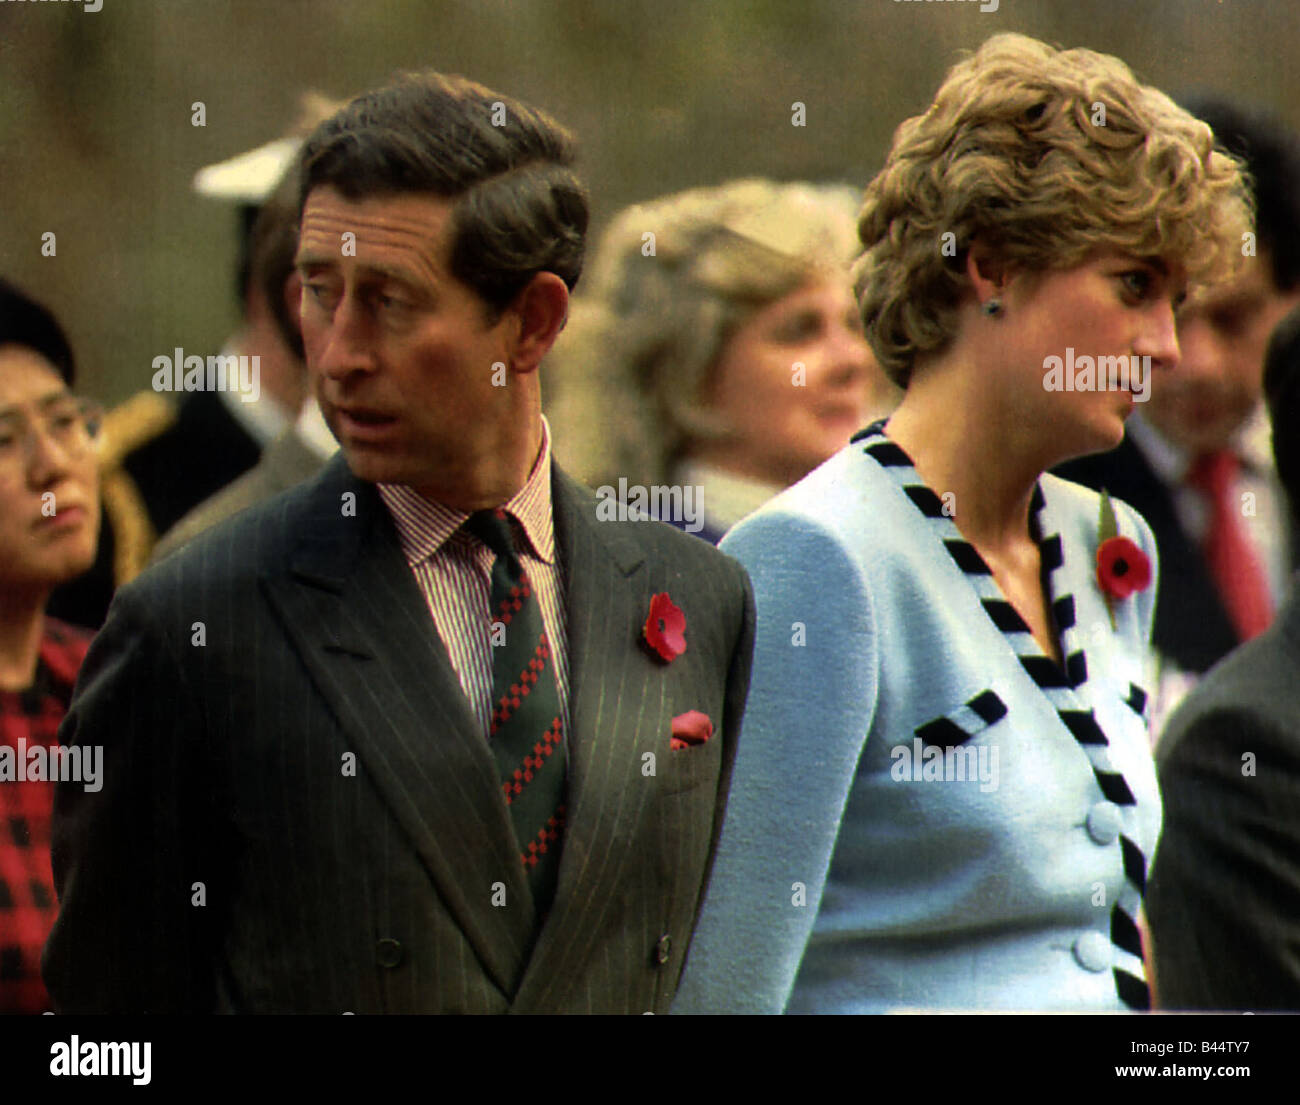 Prince and Princess of Wales on a visit to South Korea before the announcement of their separation November 1992 Stock Photo